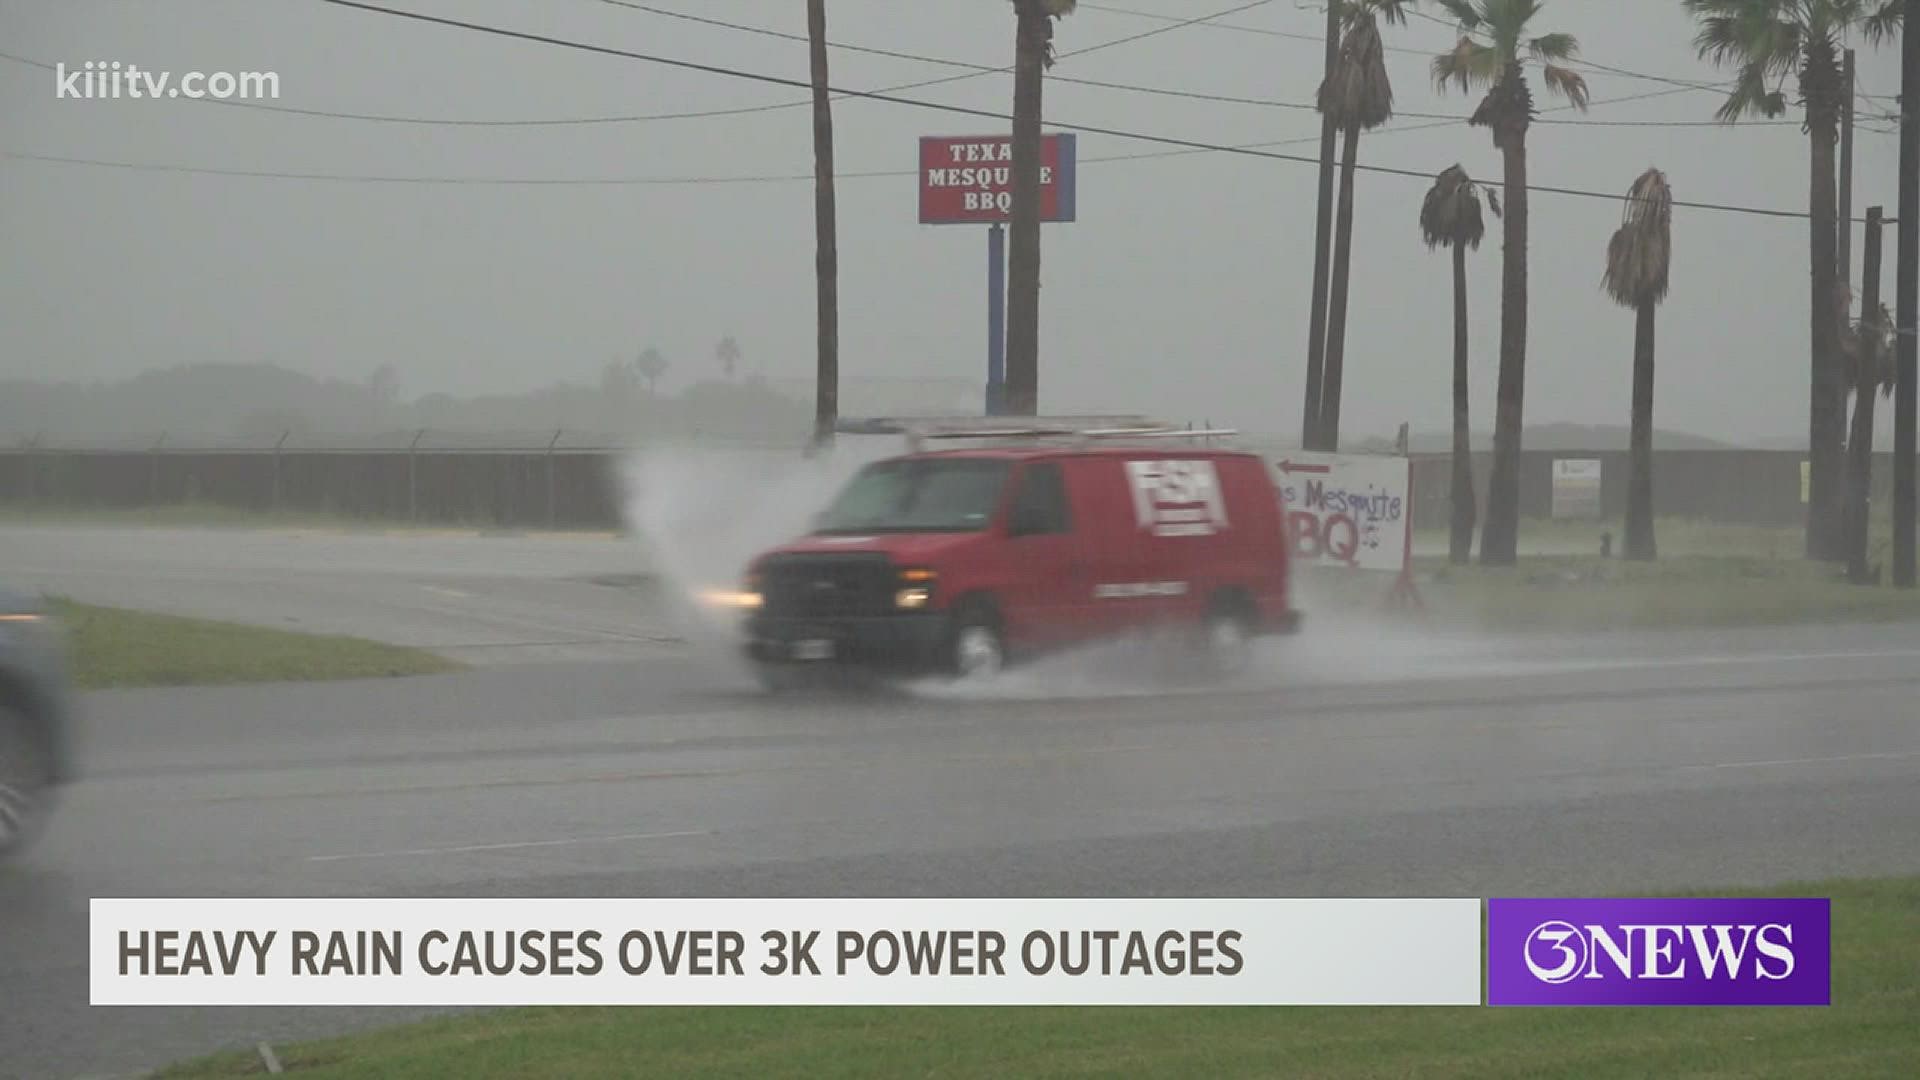 According to AEP Communications Manager, Omar Lopez the strong storms and heavy rain caused an estimated 3,500 customers to experience power outages.